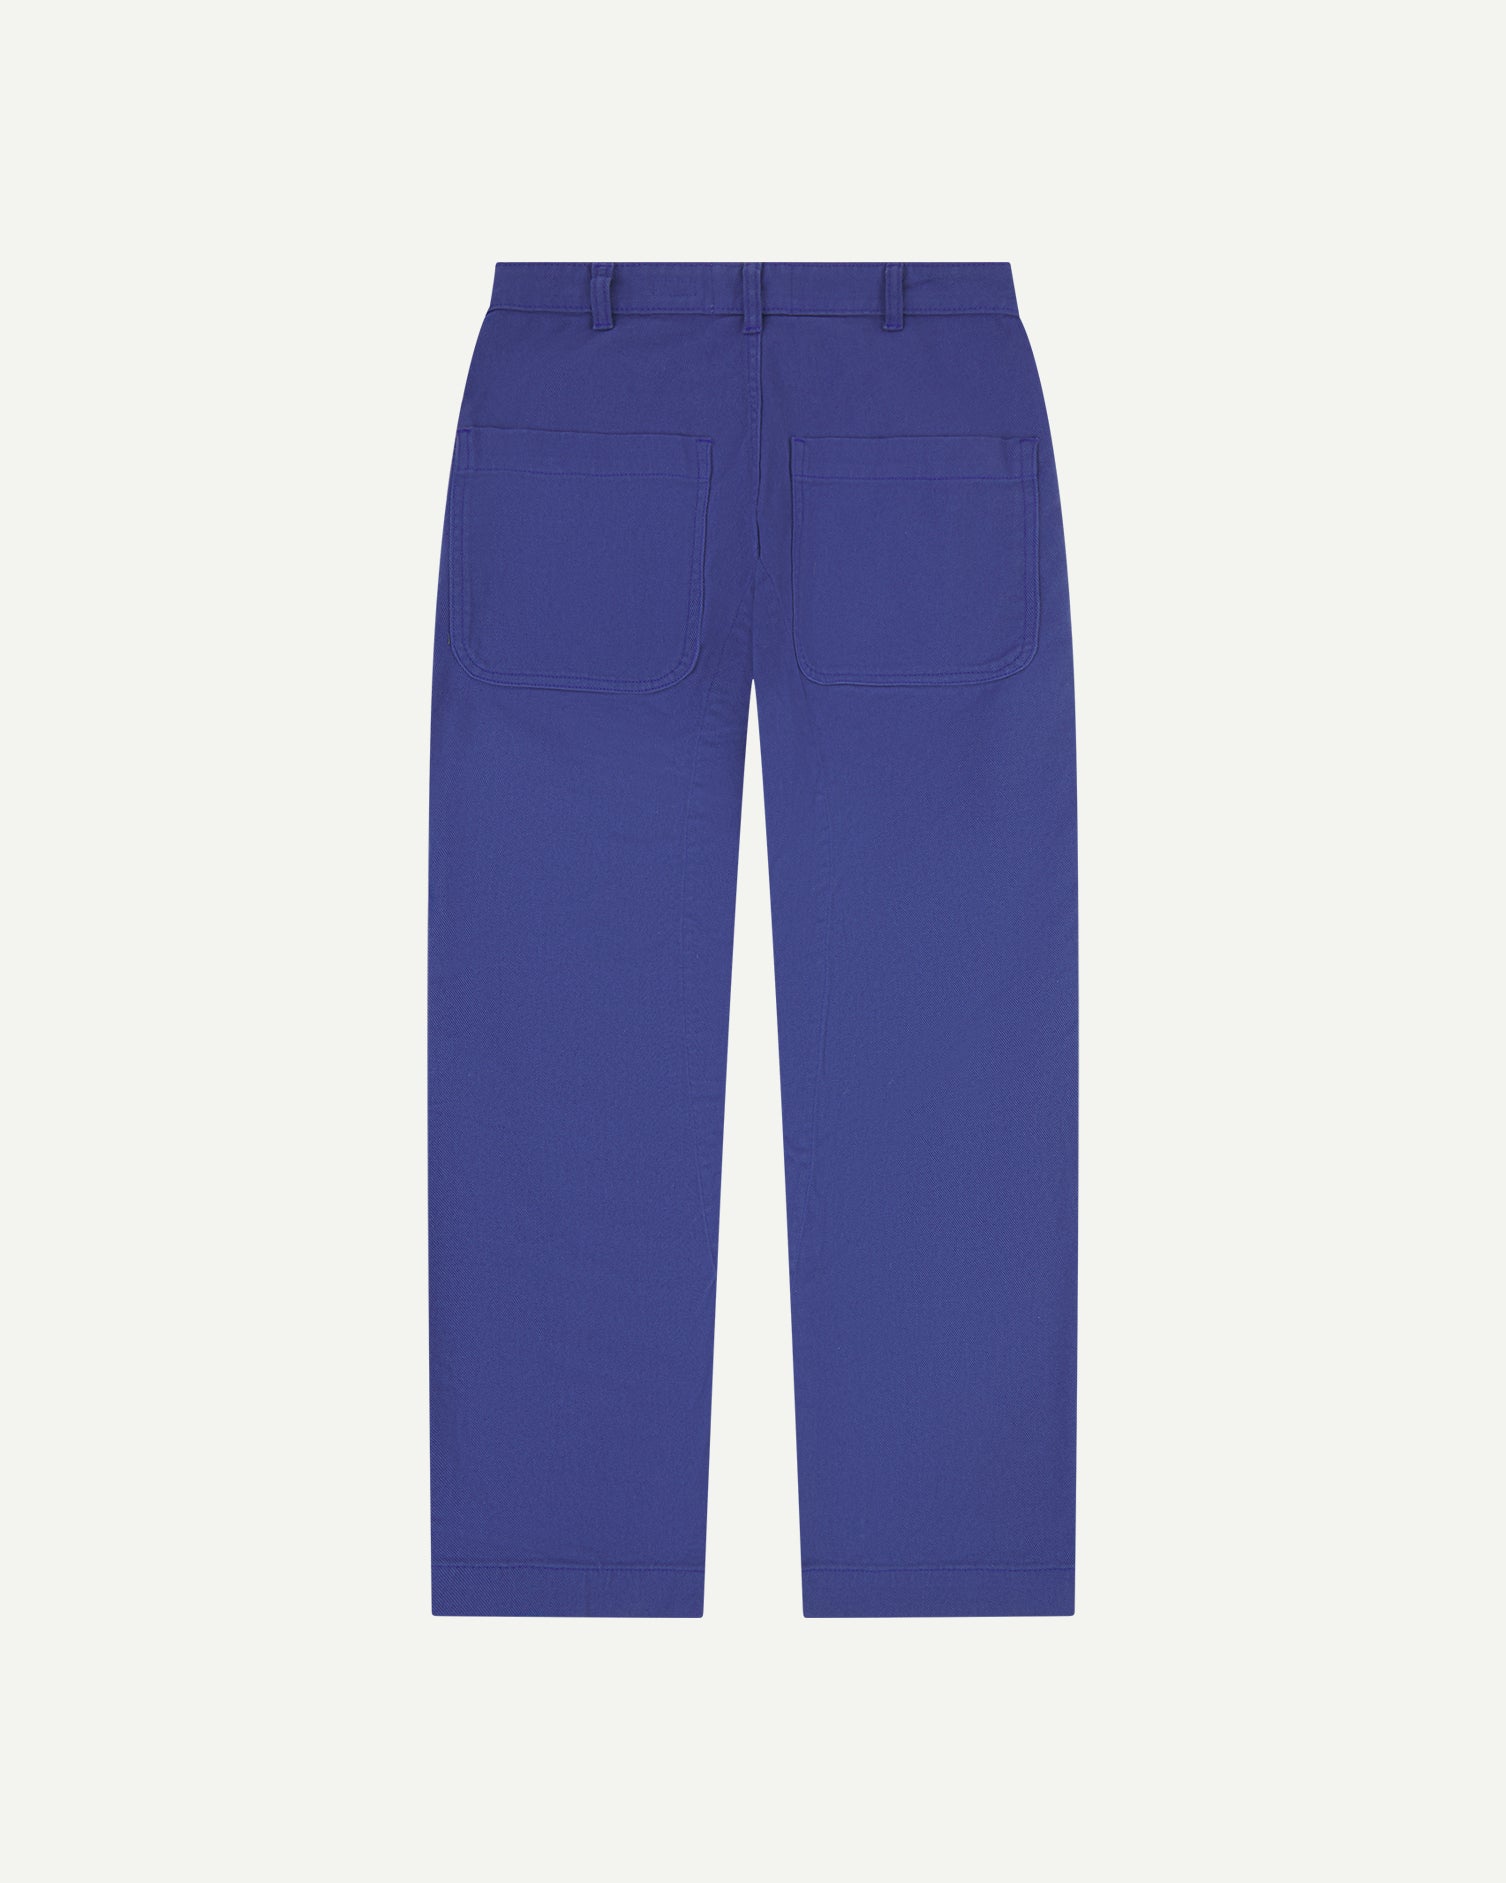 Back view of Uskees cotton drill 'commuter' trousers for men in ultra blue showing back pockets